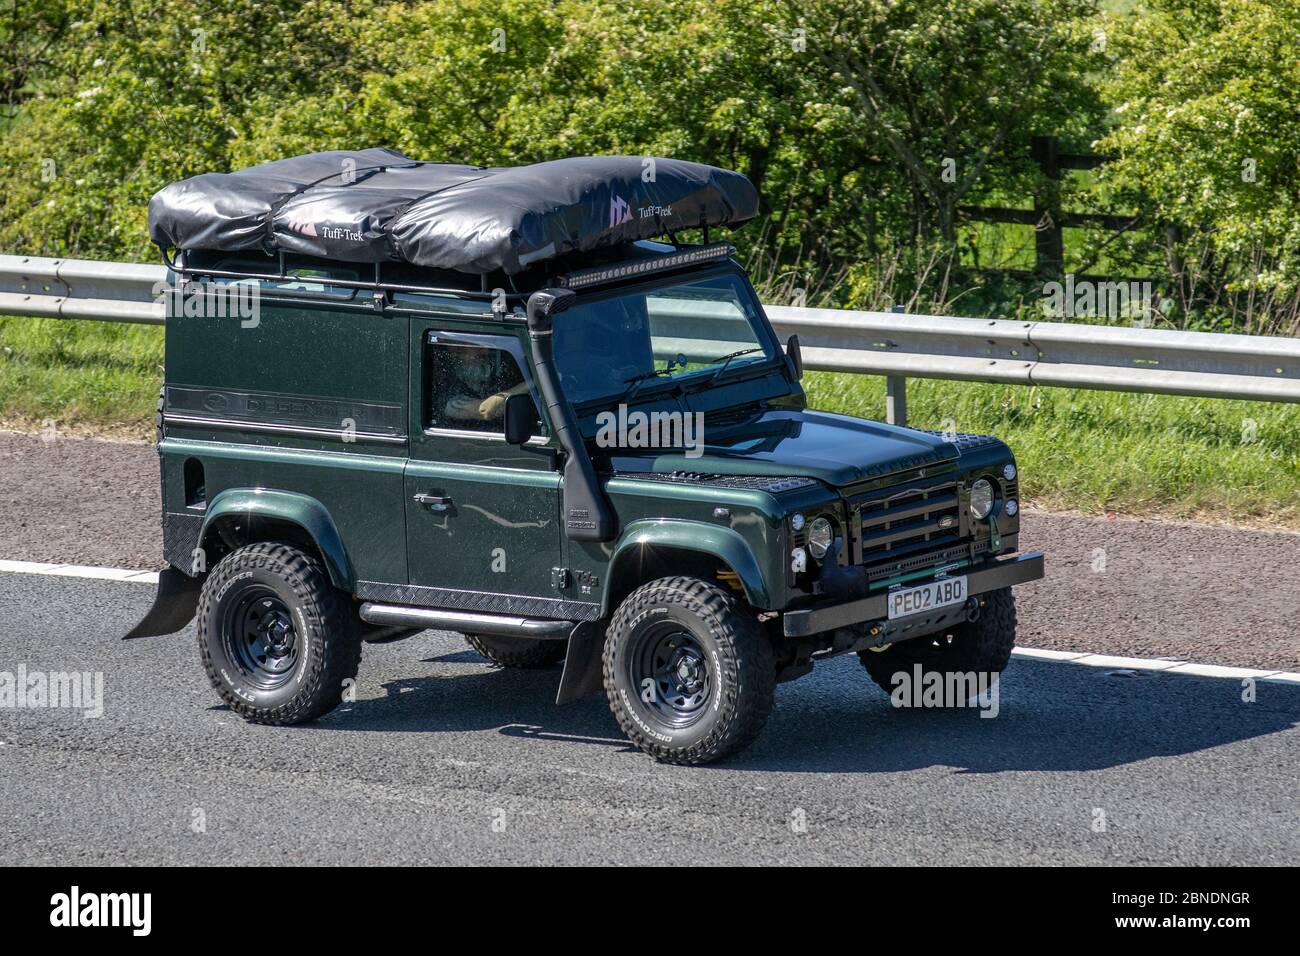 Vintage  expedition leisure, British off-road 4x4, rugged off-road all-terrain overland rally adventure vehicle, LandRover Discovery Turbo Diesel UK Stock Photo